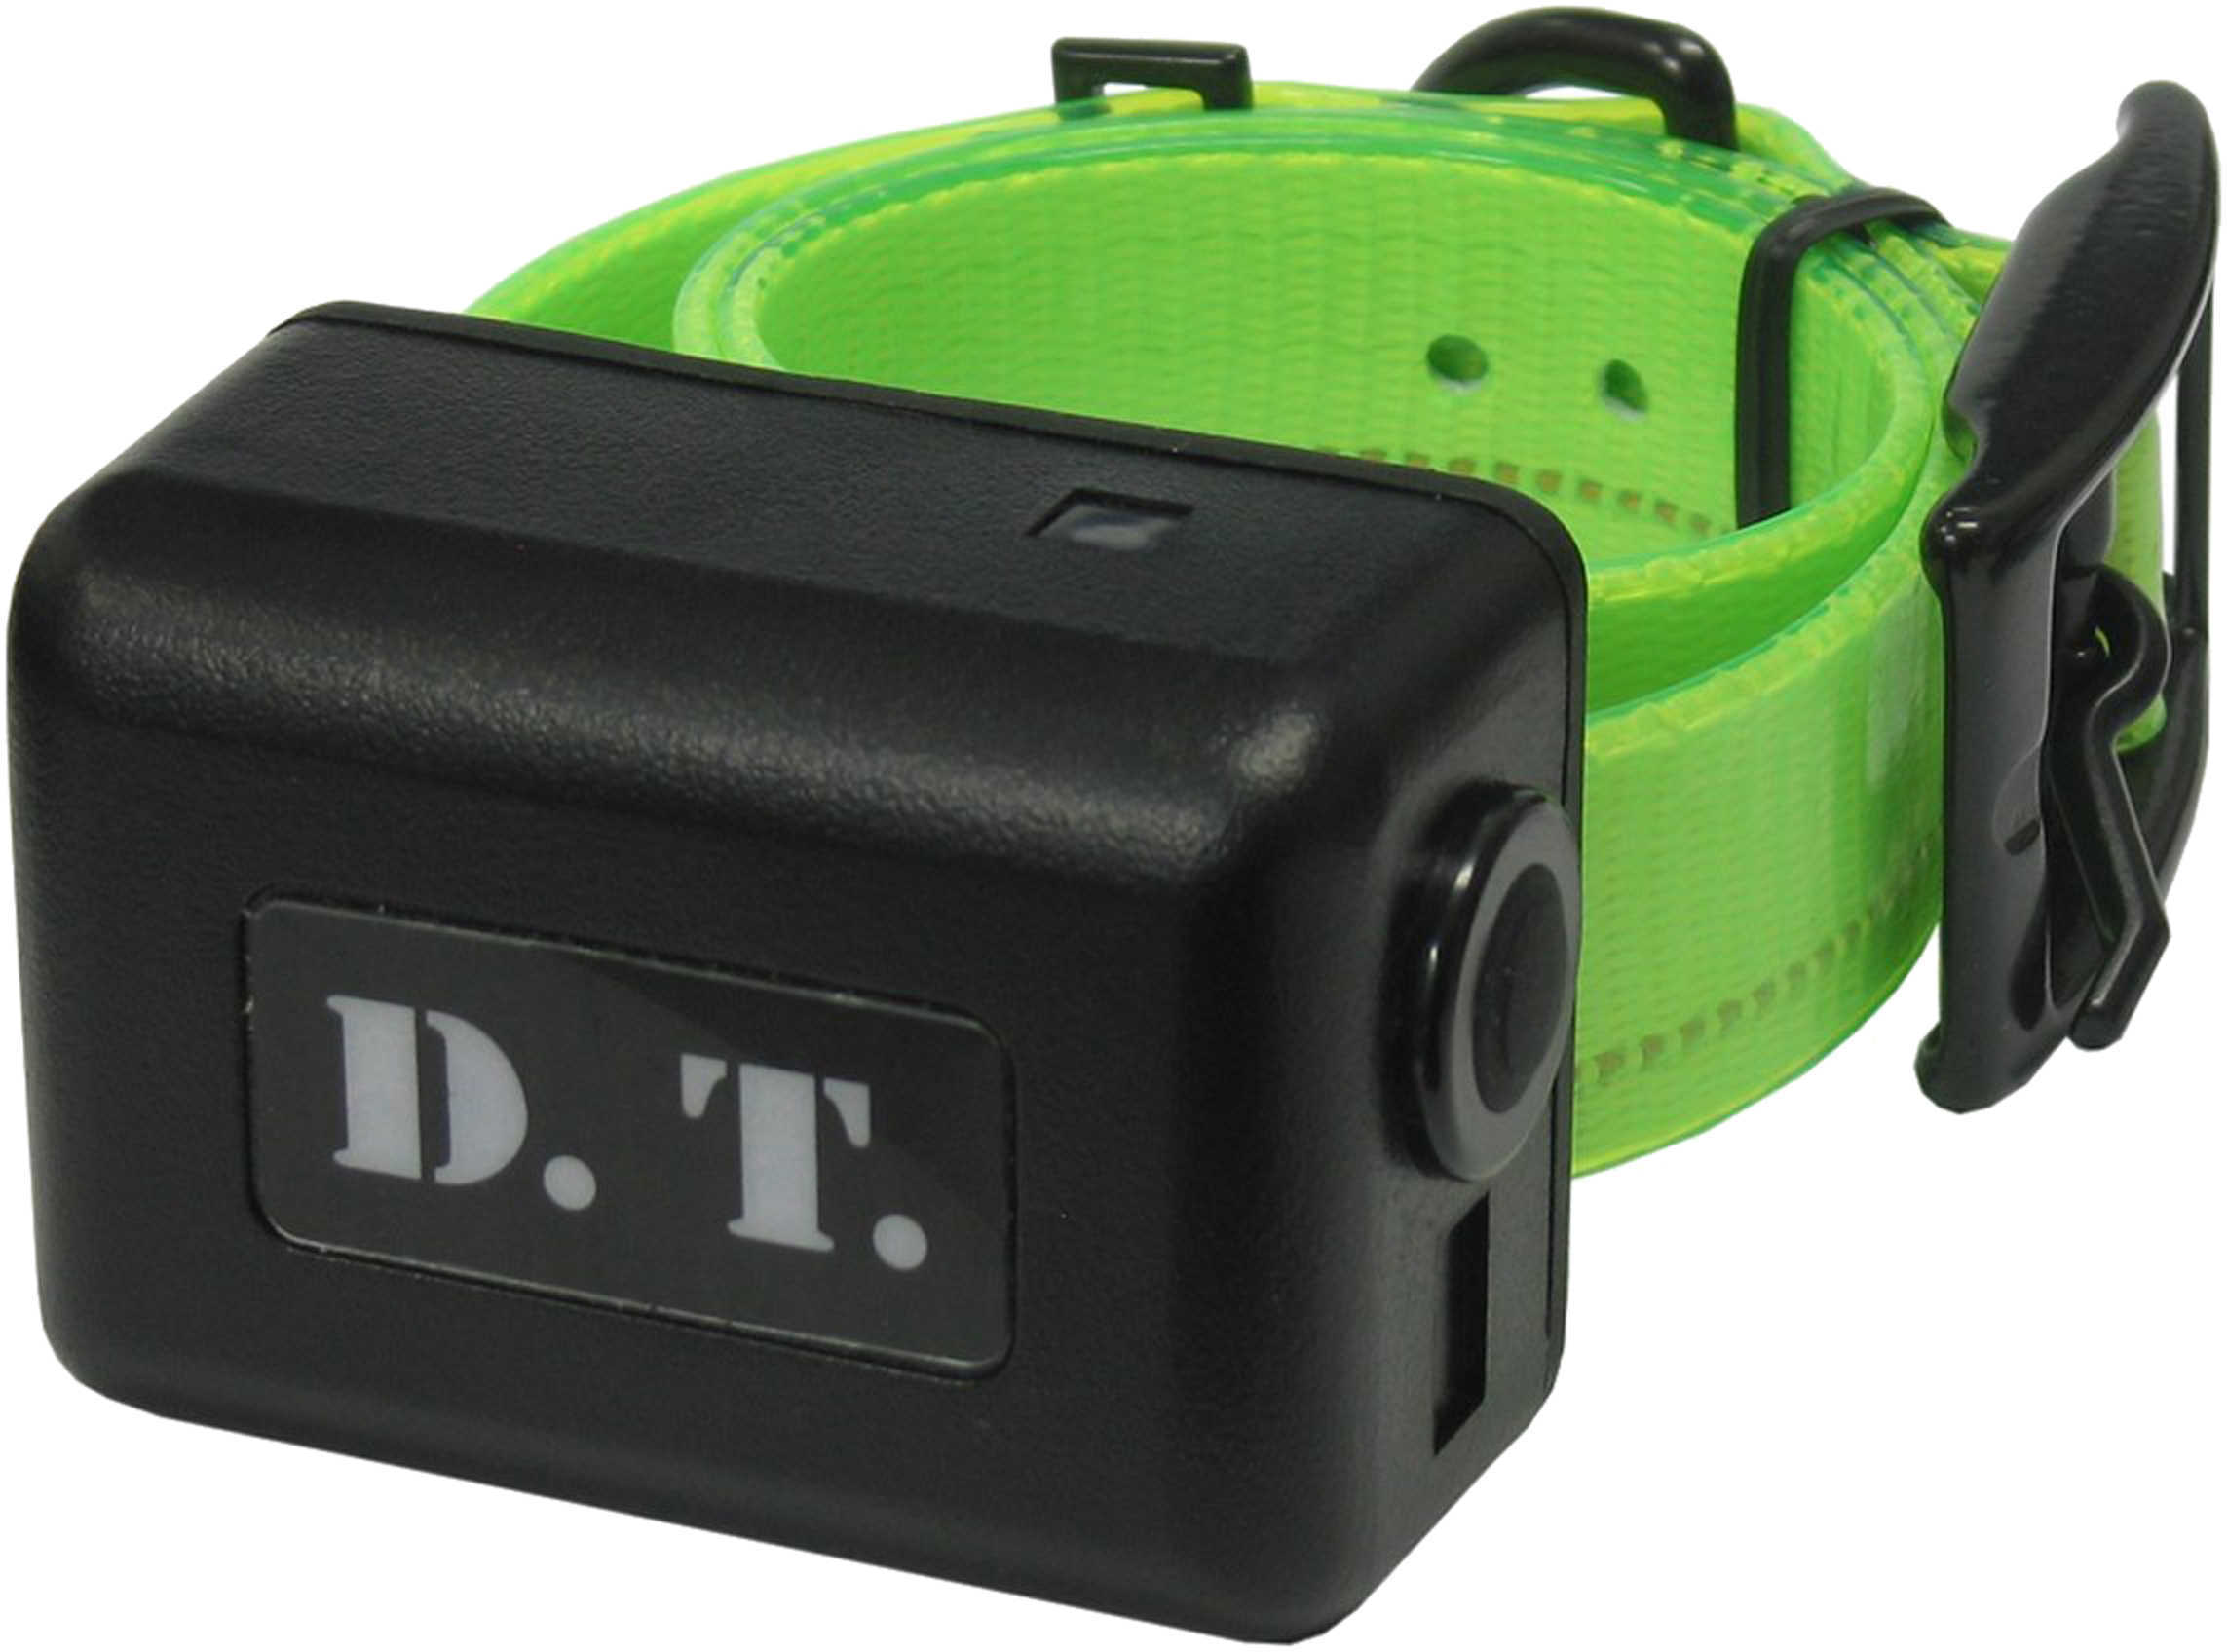 DT H2O Green Replacement Collar